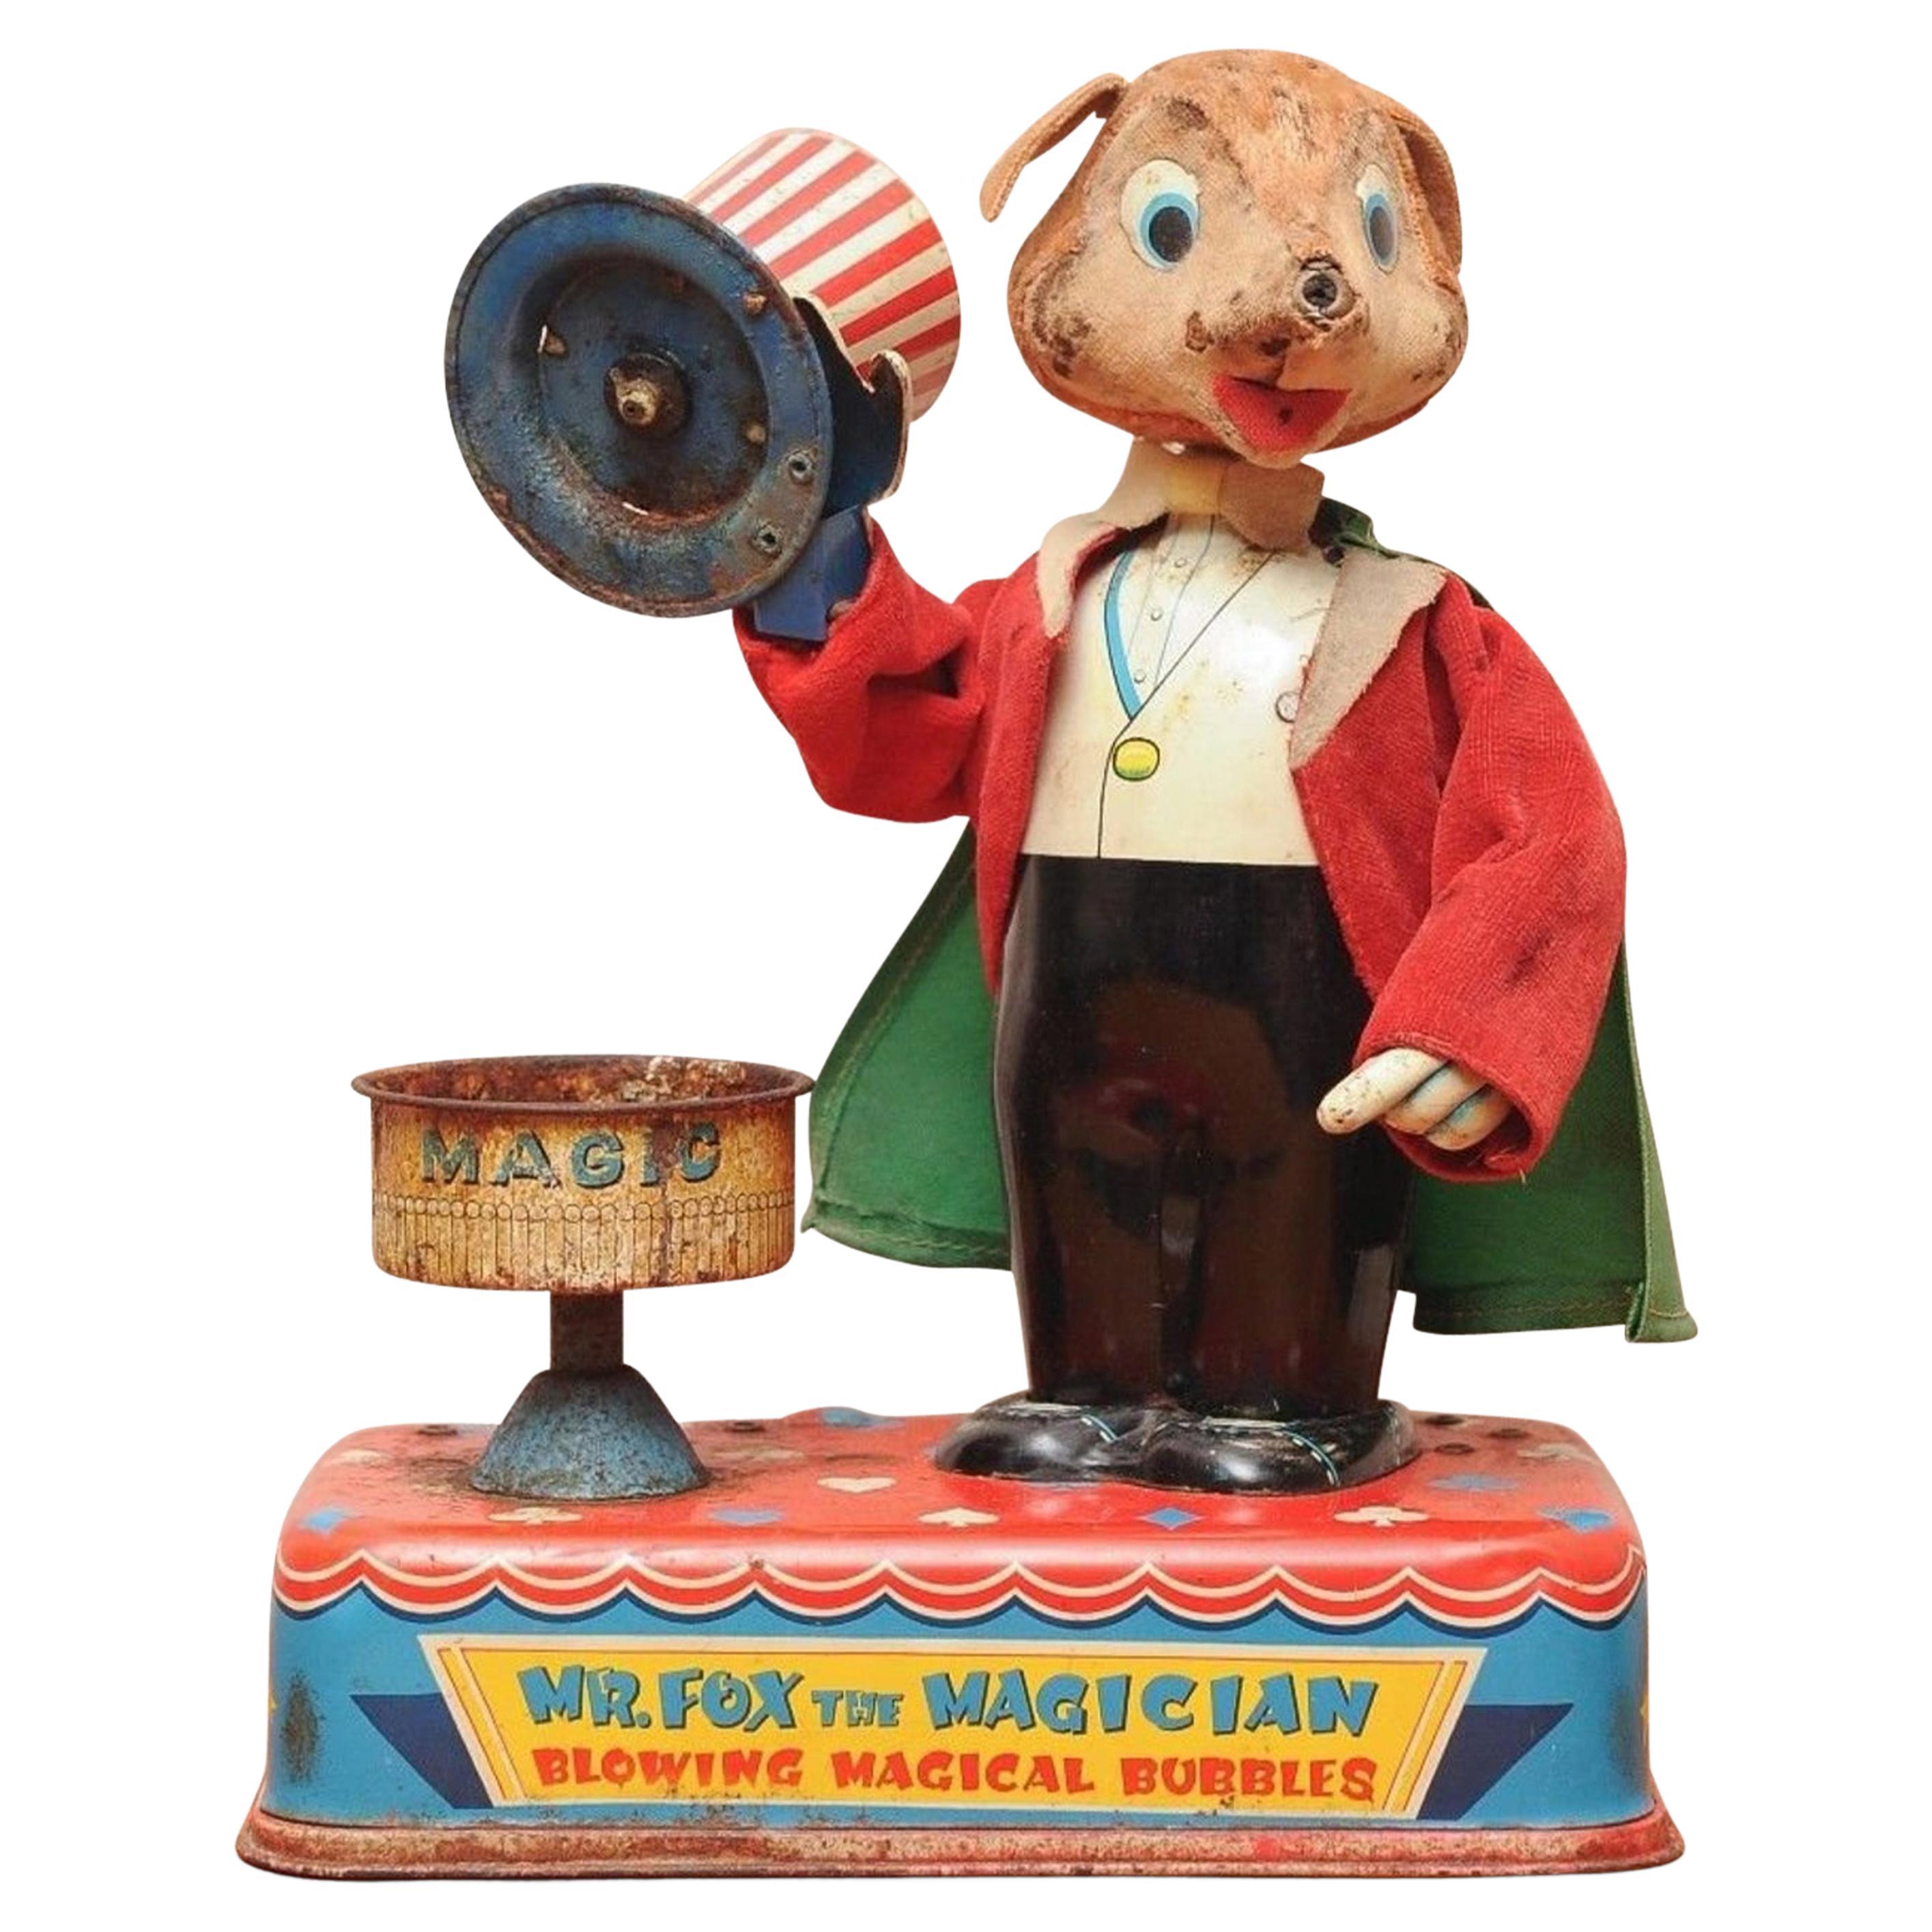 Mr Fox The Magician Blowing Magical Bubbles working Tin Toy by Yonezawa of Japan For Sale